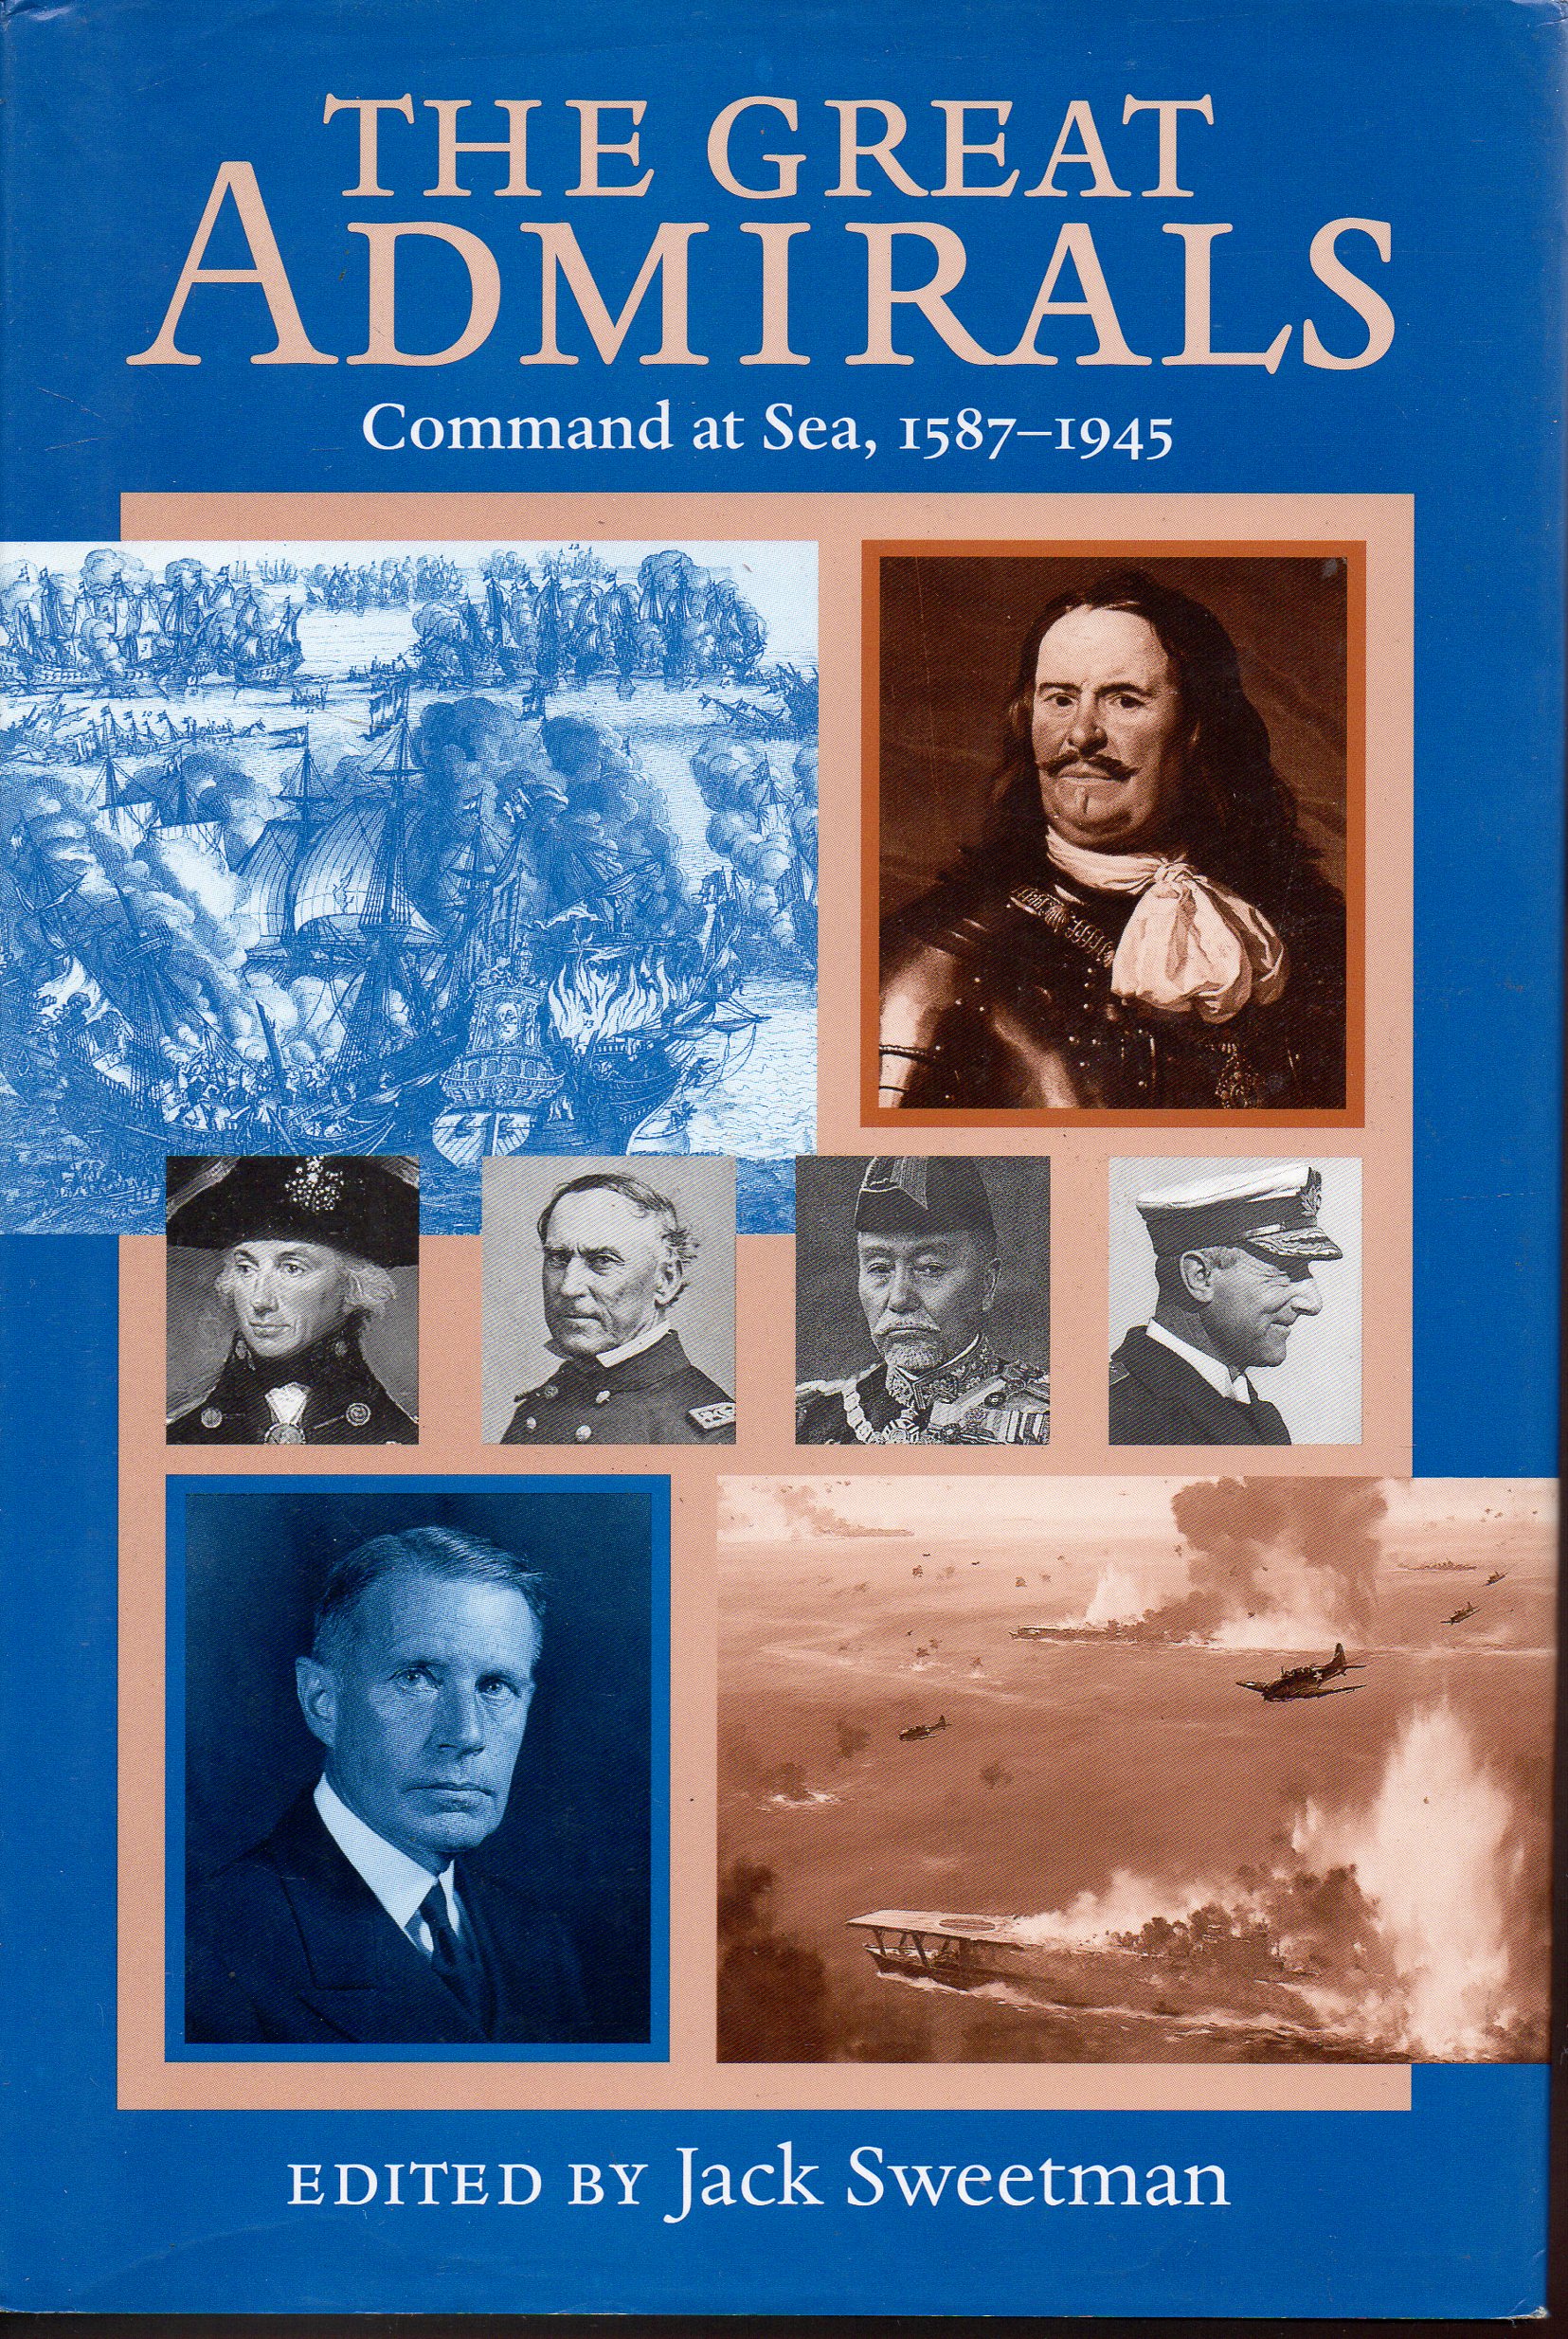 The Great Admirals: Command at Sea 1587 - 1945 - Jack Sweetman Editor